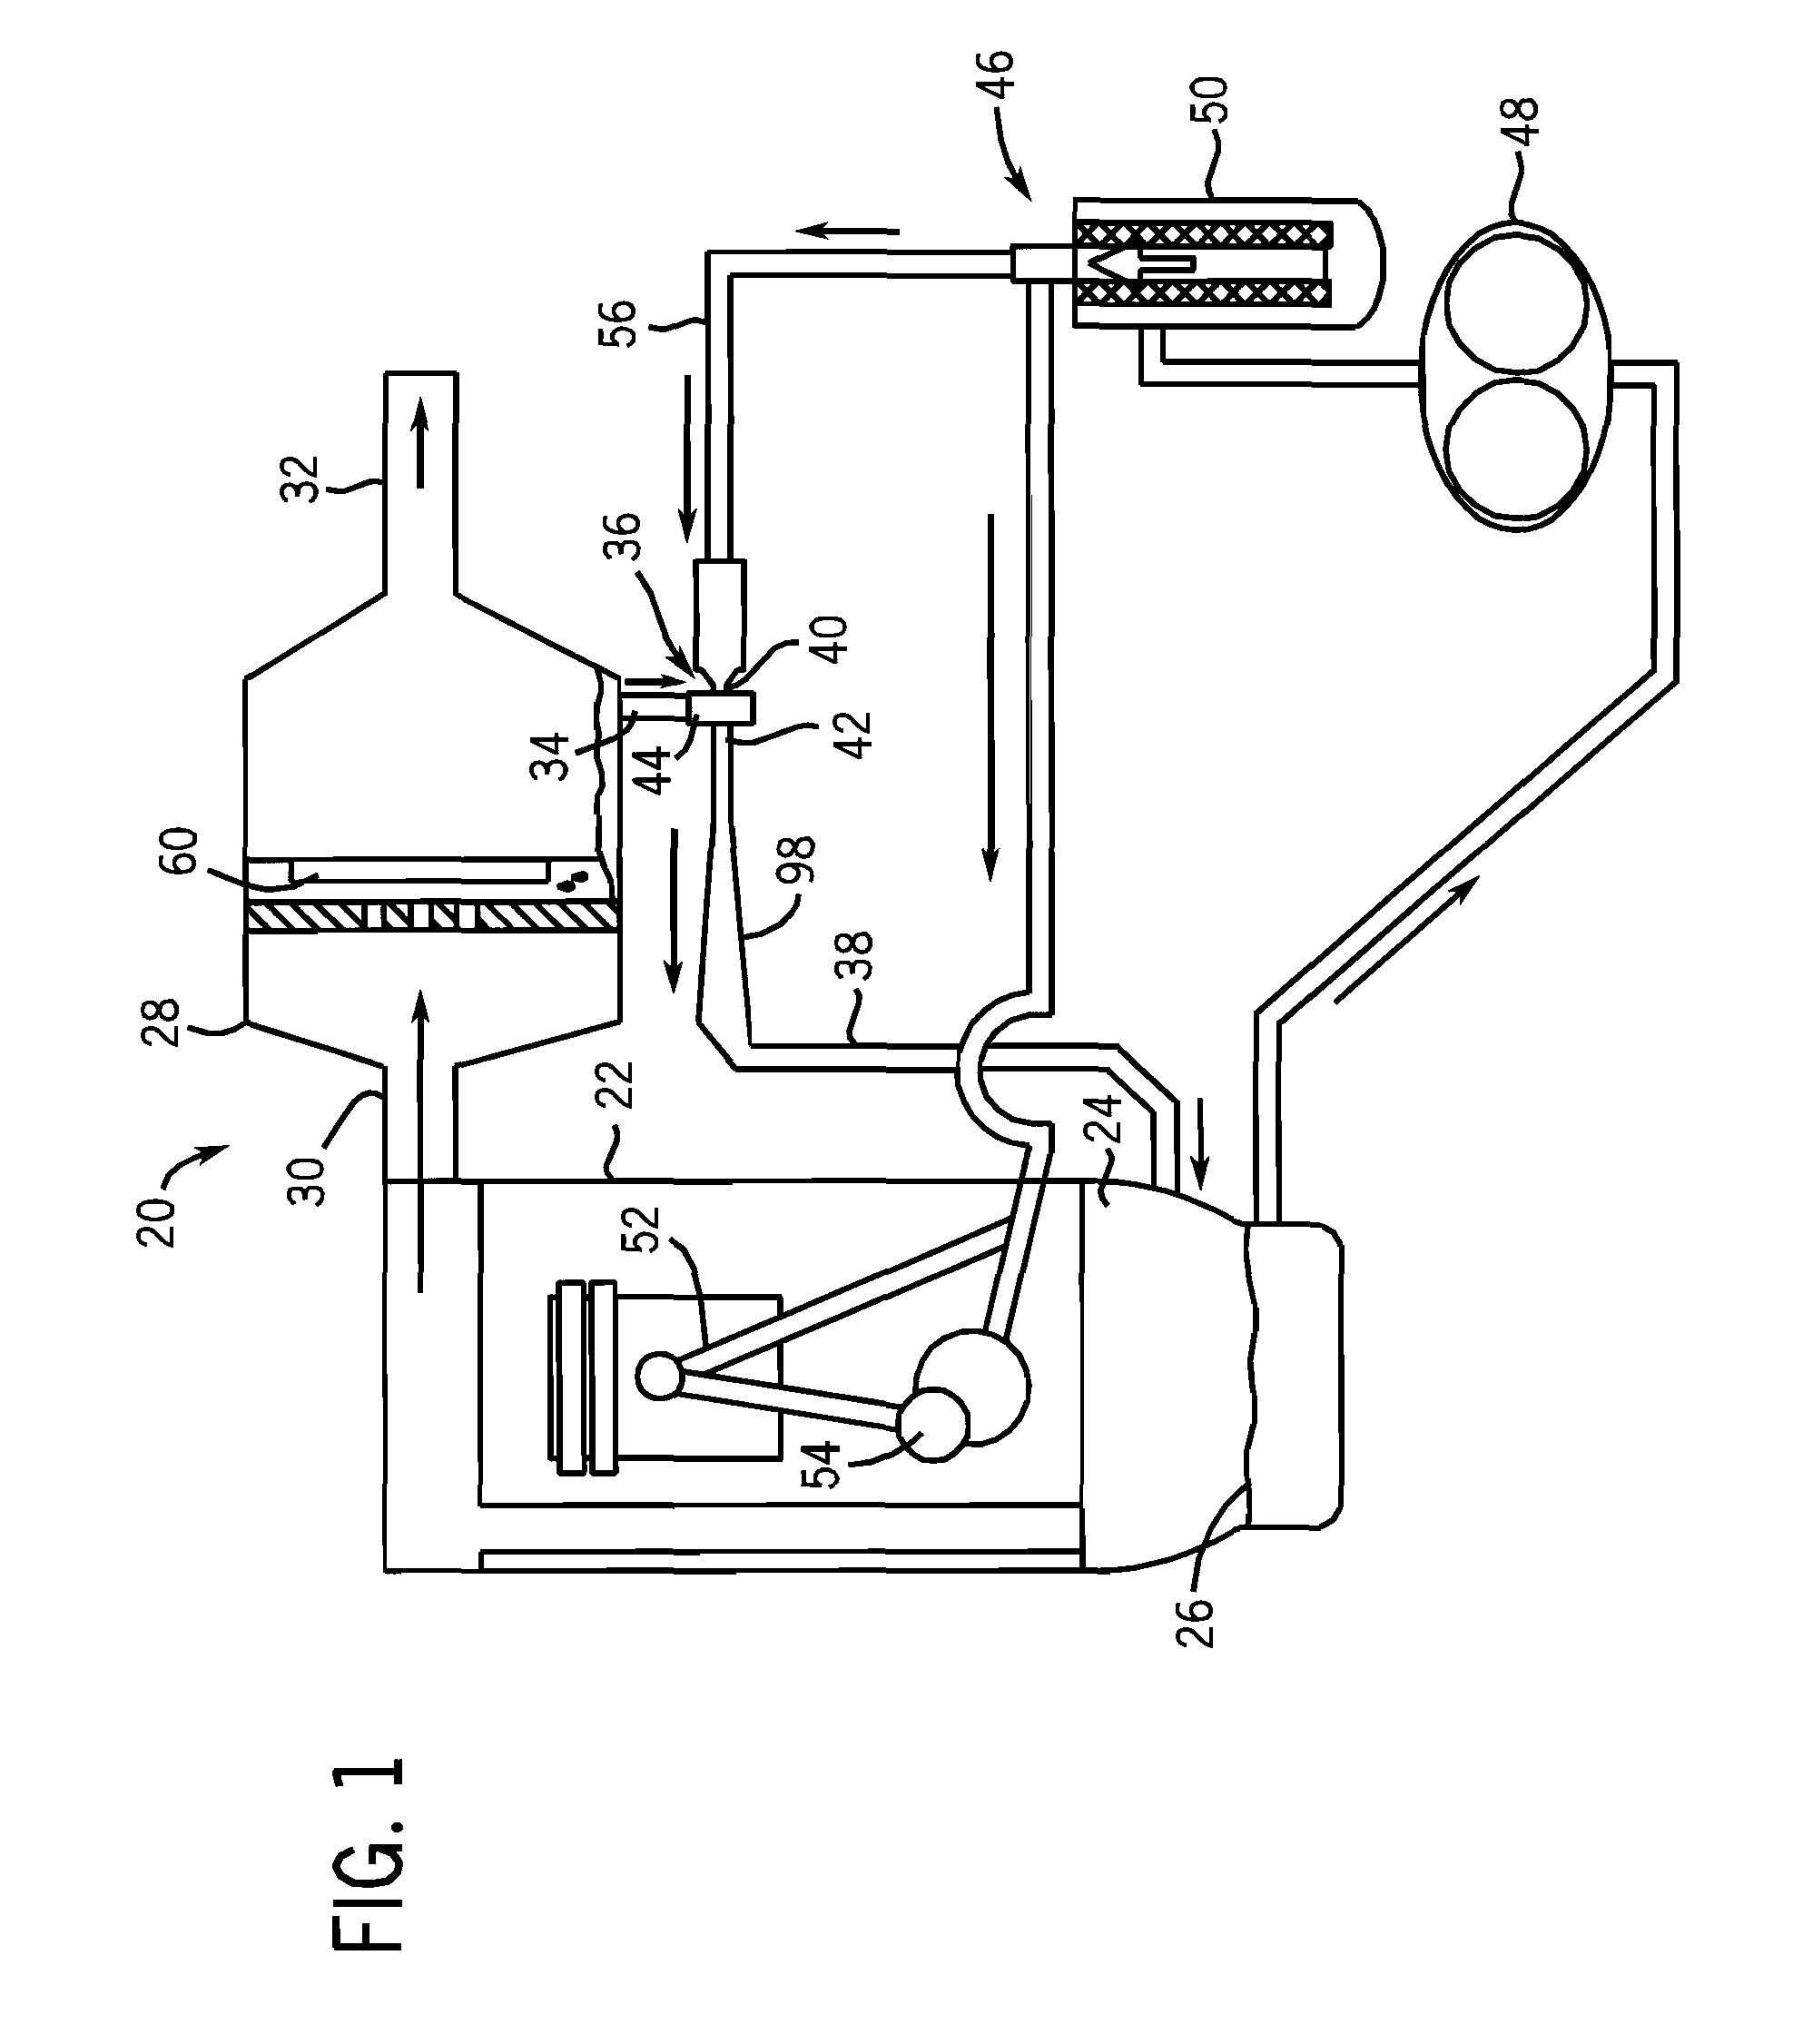 Crankcase Ventilation System with Pumped Scavenged Oil